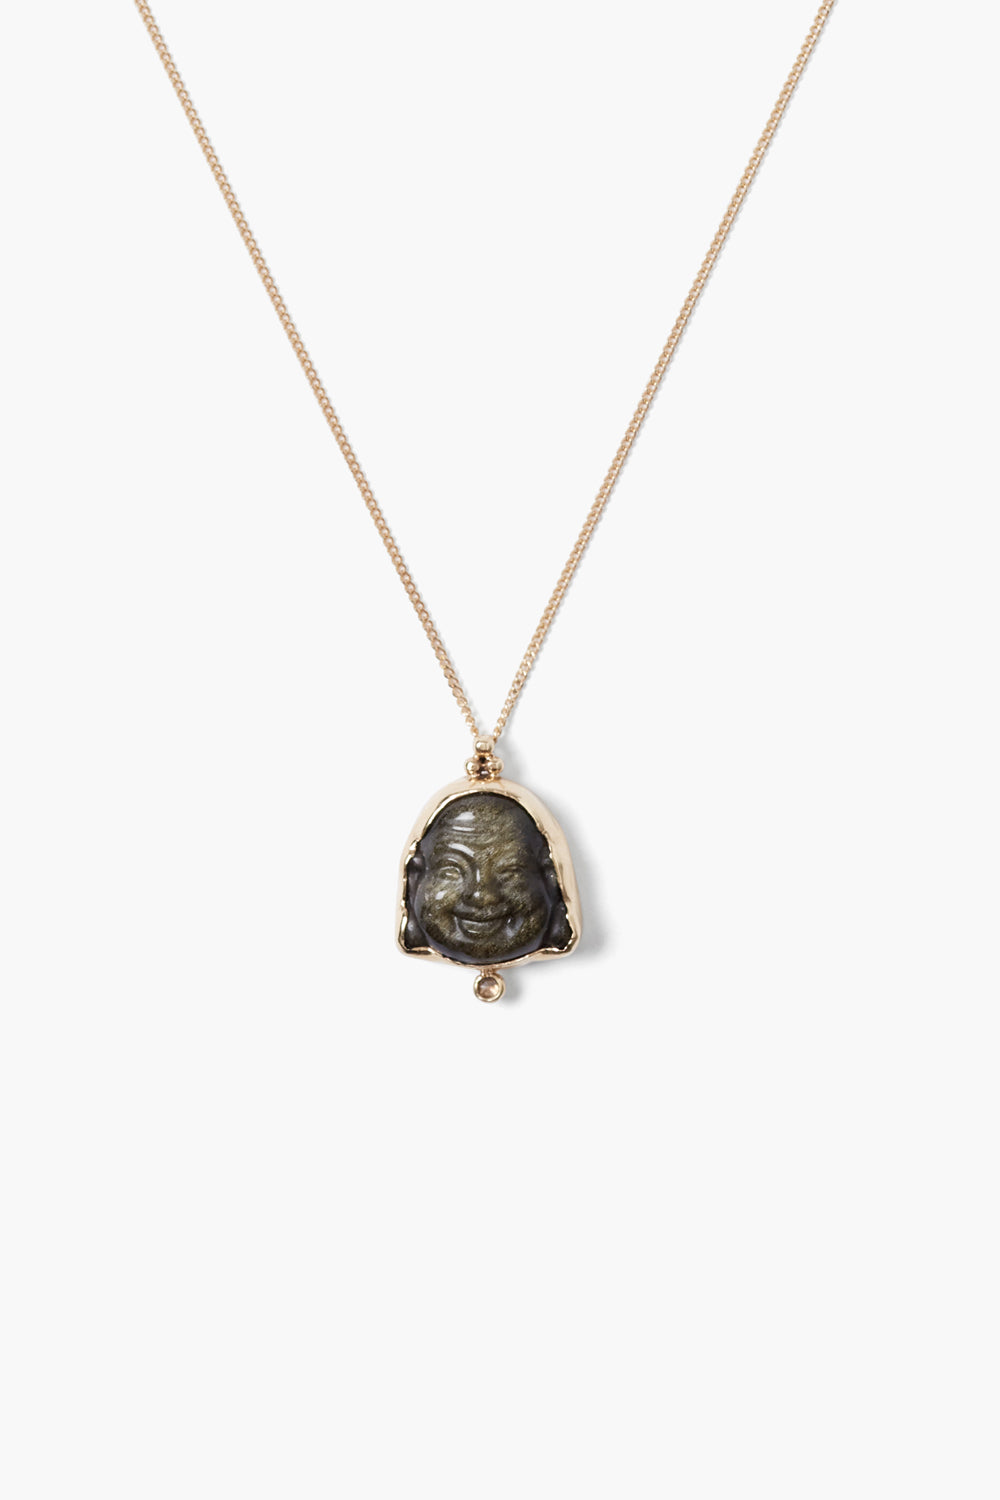 GOLDEN OBSIDIAN BUDDHA NECKLACE - Kingfisher Road - Online Boutique